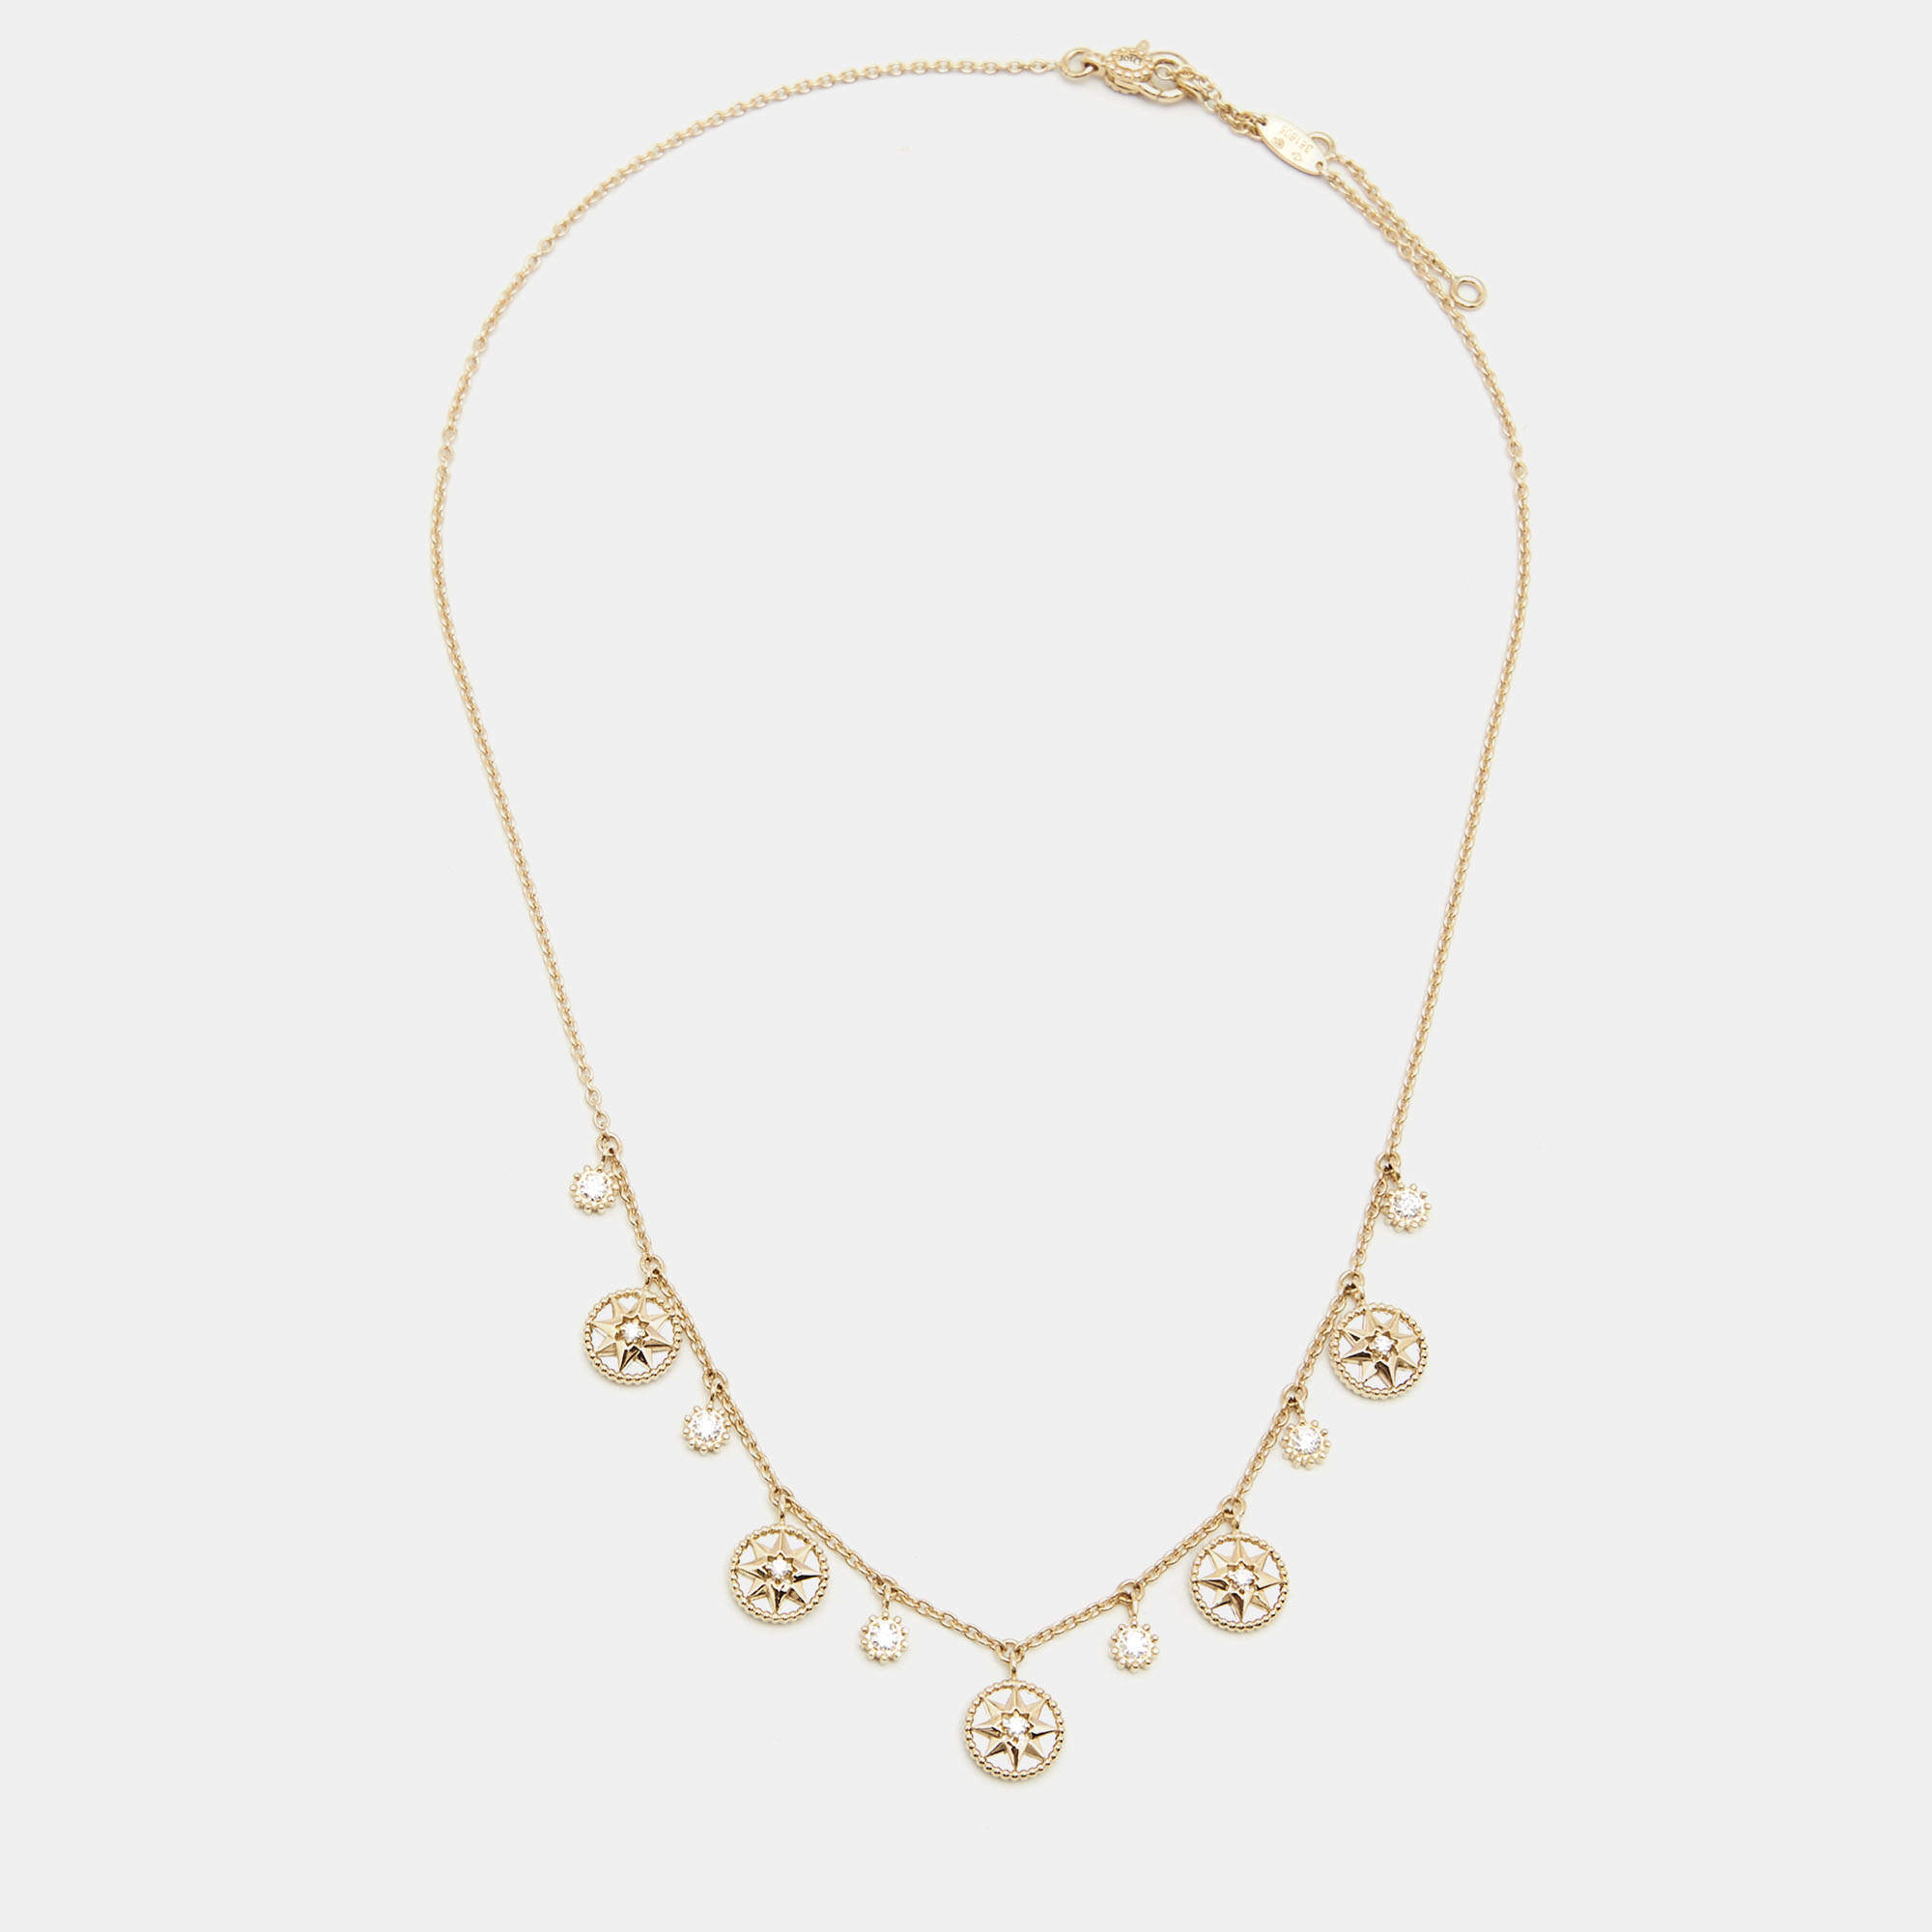 Rose Des Vents and Rose Céleste Long Necklace Yellow Gold, Platinum,  Diamonds, Mother-of-Pearl and Onyx